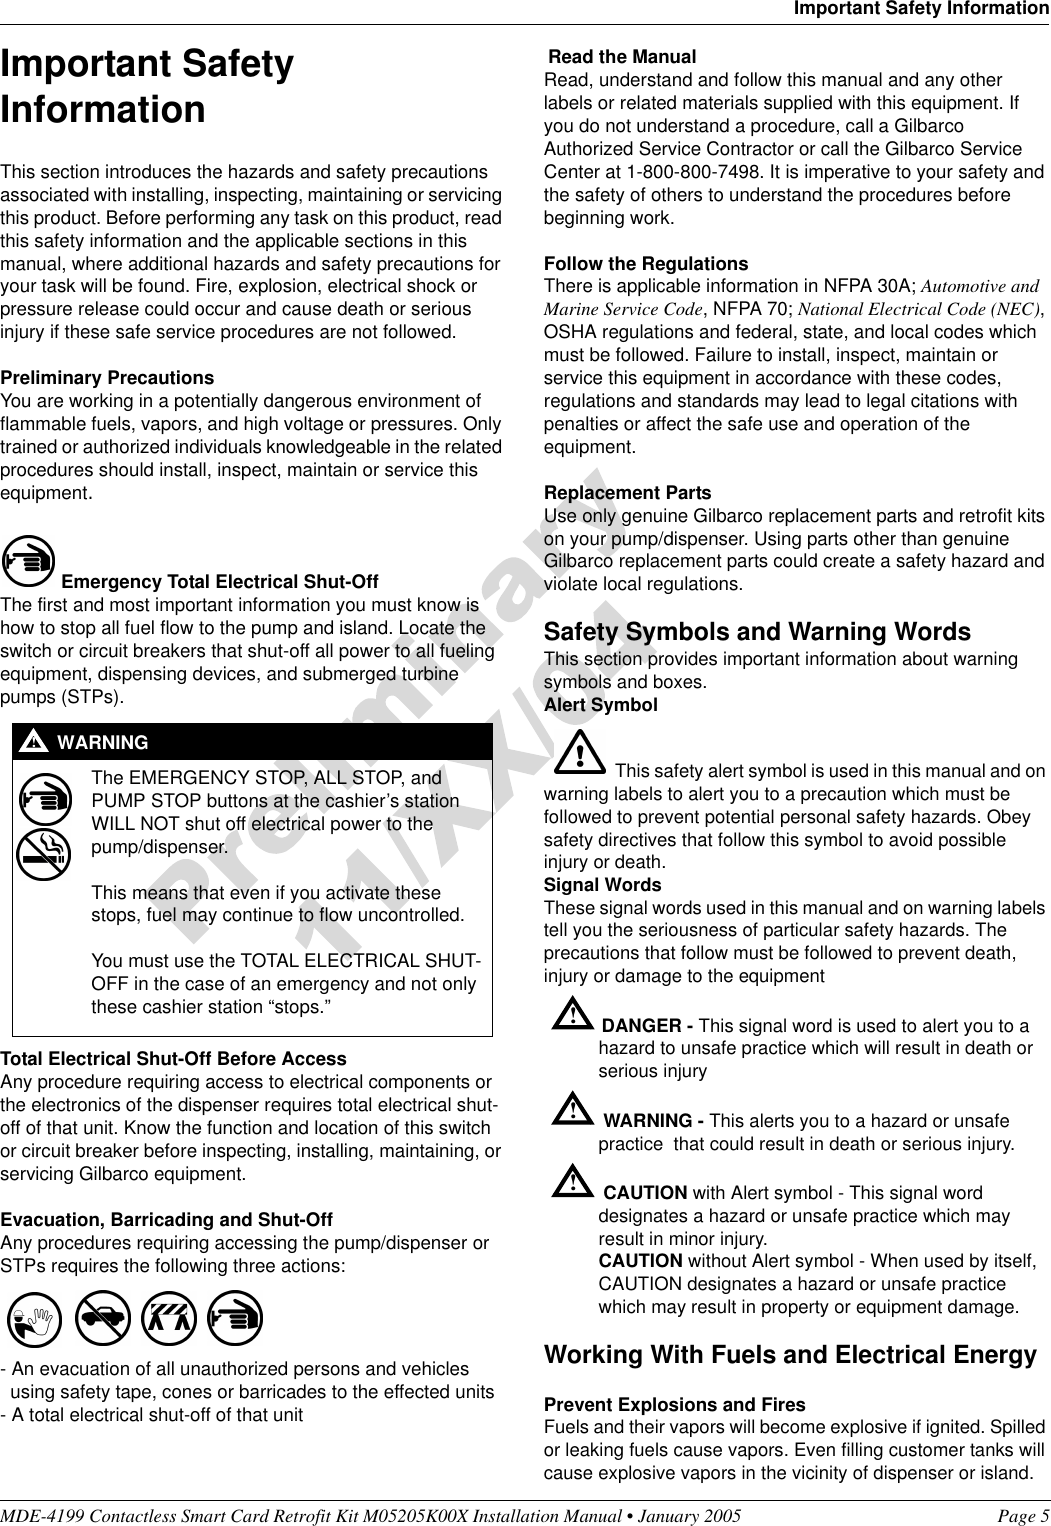 MDE-4199 Contactless Smart Card Retrofit Kit M05205K00X Installation Manual • January 2005 Page 5Important Safety InformationImportant Safety InformationThis section introduces the hazards and safety precautions associated with installing, inspecting, maintaining or servicing this product. Before performing any task on this product, read this safety information and the applicable sections in this manual, where additional hazards and safety precautions for your task will be found. Fire, explosion, electrical shock or pressure release could occur and cause death or serious injury if these safe service procedures are not followed. Preliminary PrecautionsYou are working in a potentially dangerous environment of flammable fuels, vapors, and high voltage or pressures. Only trained or authorized individuals knowledgeable in the related procedures should install, inspect, maintain or service this equipment.Emergency Total Electrical Shut-OffThe first and most important information you must know is how to stop all fuel flow to the pump and island. Locate the switch or circuit breakers that shut-off all power to all fueling equipment, dispensing devices, and submerged turbine pumps (STPs). Total Electrical Shut-Off Before AccessAny procedure requiring access to electrical components or the electronics of the dispenser requires total electrical shut-off of that unit. Know the function and location of this switch or circuit breaker before inspecting, installing, maintaining, or servicing Gilbarco equipment.Evacuation, Barricading and Shut-OffAny procedures requiring accessing the pump/dispenser or STPs requires the following three actions:- An evacuation of all unauthorized persons and vehicles   using safety tape, cones or barricades to the effected units- A total electrical shut-off of that unit Read the ManualRead, understand and follow this manual and any other labels or related materials supplied with this equipment. If you do not understand a procedure, call a Gilbarco Authorized Service Contractor or call the Gilbarco Service Center at 1-800-800-7498. It is imperative to your safety and the safety of others to understand the procedures before beginning work.Follow the RegulationsThere is applicable information in NFPA 30A; Automotive and Marine Service Code, NFPA 70; National Electrical Code (NEC), OSHA regulations and federal, state, and local codes which must be followed. Failure to install, inspect, maintain or service this equipment in accordance with these codes, regulations and standards may lead to legal citations with penalties or affect the safe use and operation of the equipment.Replacement PartsUse only genuine Gilbarco replacement parts and retrofit kits on your pump/dispenser. Using parts other than genuine Gilbarco replacement parts could create a safety hazard and violate local regulations.Safety Symbols and Warning WordsThis section provides important information about warning symbols and boxes.Alert Symbol This safety alert symbol is used in this manual and on warning labels to alert you to a precaution which must be followed to prevent potential personal safety hazards. Obey safety directives that follow this symbol to avoid possible injury or death.Signal WordsThese signal words used in this manual and on warning labels tell you the seriousness of particular safety hazards. The precautions that follow must be followed to prevent death, injury or damage to the equipmentDANGER - This signal word is used to alert you to a hazard to unsafe practice which will result in death or serious injuryWARNING - This alerts you to a hazard or unsafe practice  that could result in death or serious injury.CAUTION with Alert symbol - This signal word designates a hazard or unsafe practice which may result in minor injury.CAUTION without Alert symbol - When used by itself, CAUTION designates a hazard or unsafe practice which may result in property or equipment damage.Working With Fuels and Electrical EnergyPrevent Explosions and FiresFuels and their vapors will become explosive if ignited. Spilled or leaking fuels cause vapors. Even filling customer tanks will cause explosive vapors in the vicinity of dispenser or island.The EMERGENCY STOP, ALL STOP, and PUMP STOP buttons at the cashier’s station WILL NOT shut off electrical power to the pump/dispenser. This means that even if you activate these stops, fuel may continue to flow uncontrolled. You must use the TOTAL ELECTRICAL SHUT-OFF in the case of an emergency and not only these cashier station “stops.”!WARNING!!!!